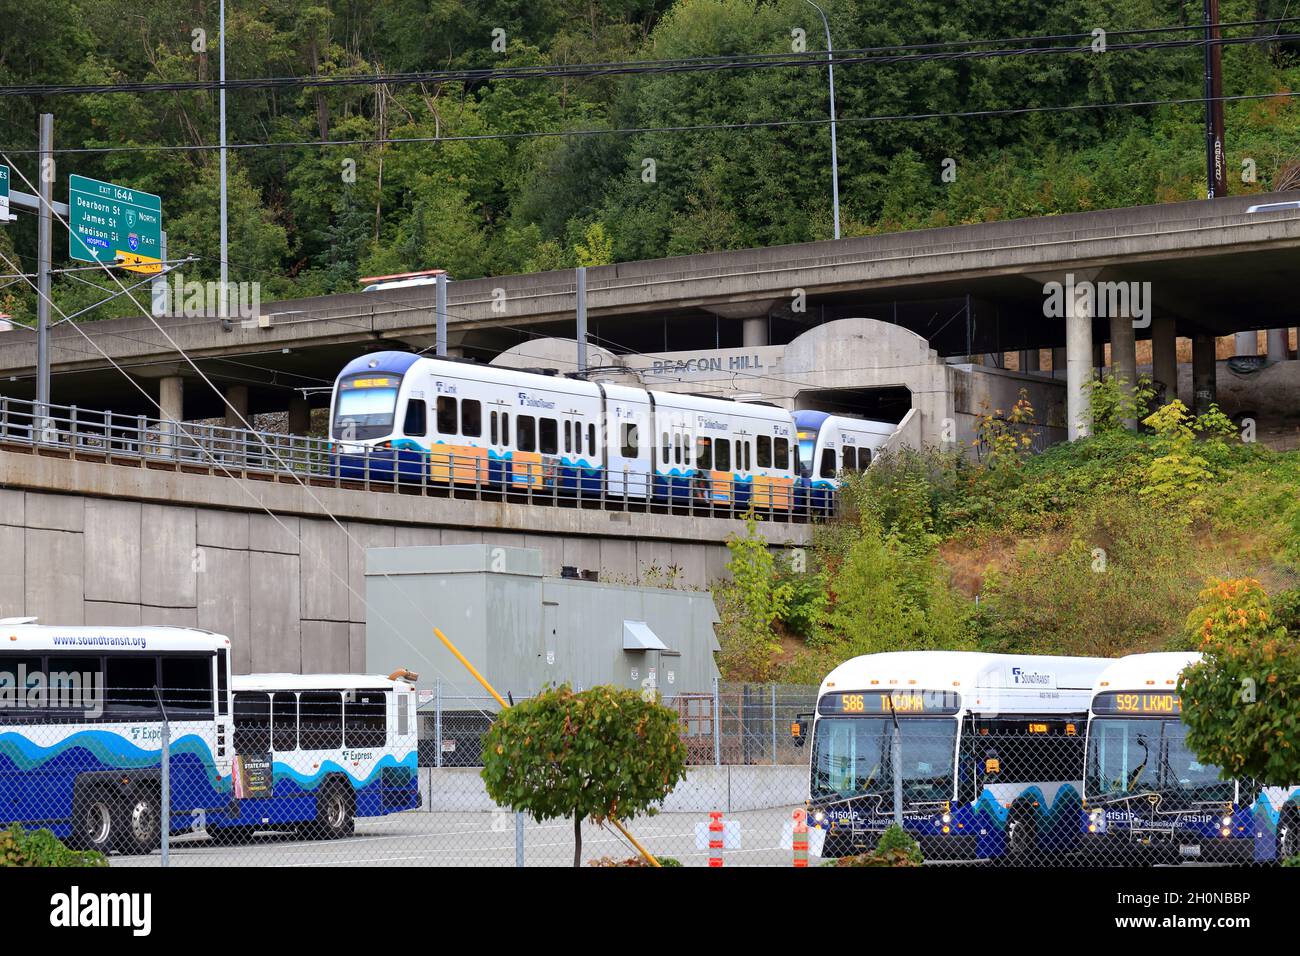 A Sound Transit Link train enters Beacon Hill Tunnel in Seattle SoDo with the Interstate 5 highway above and a commuter bus parking lot below. Stock Photo